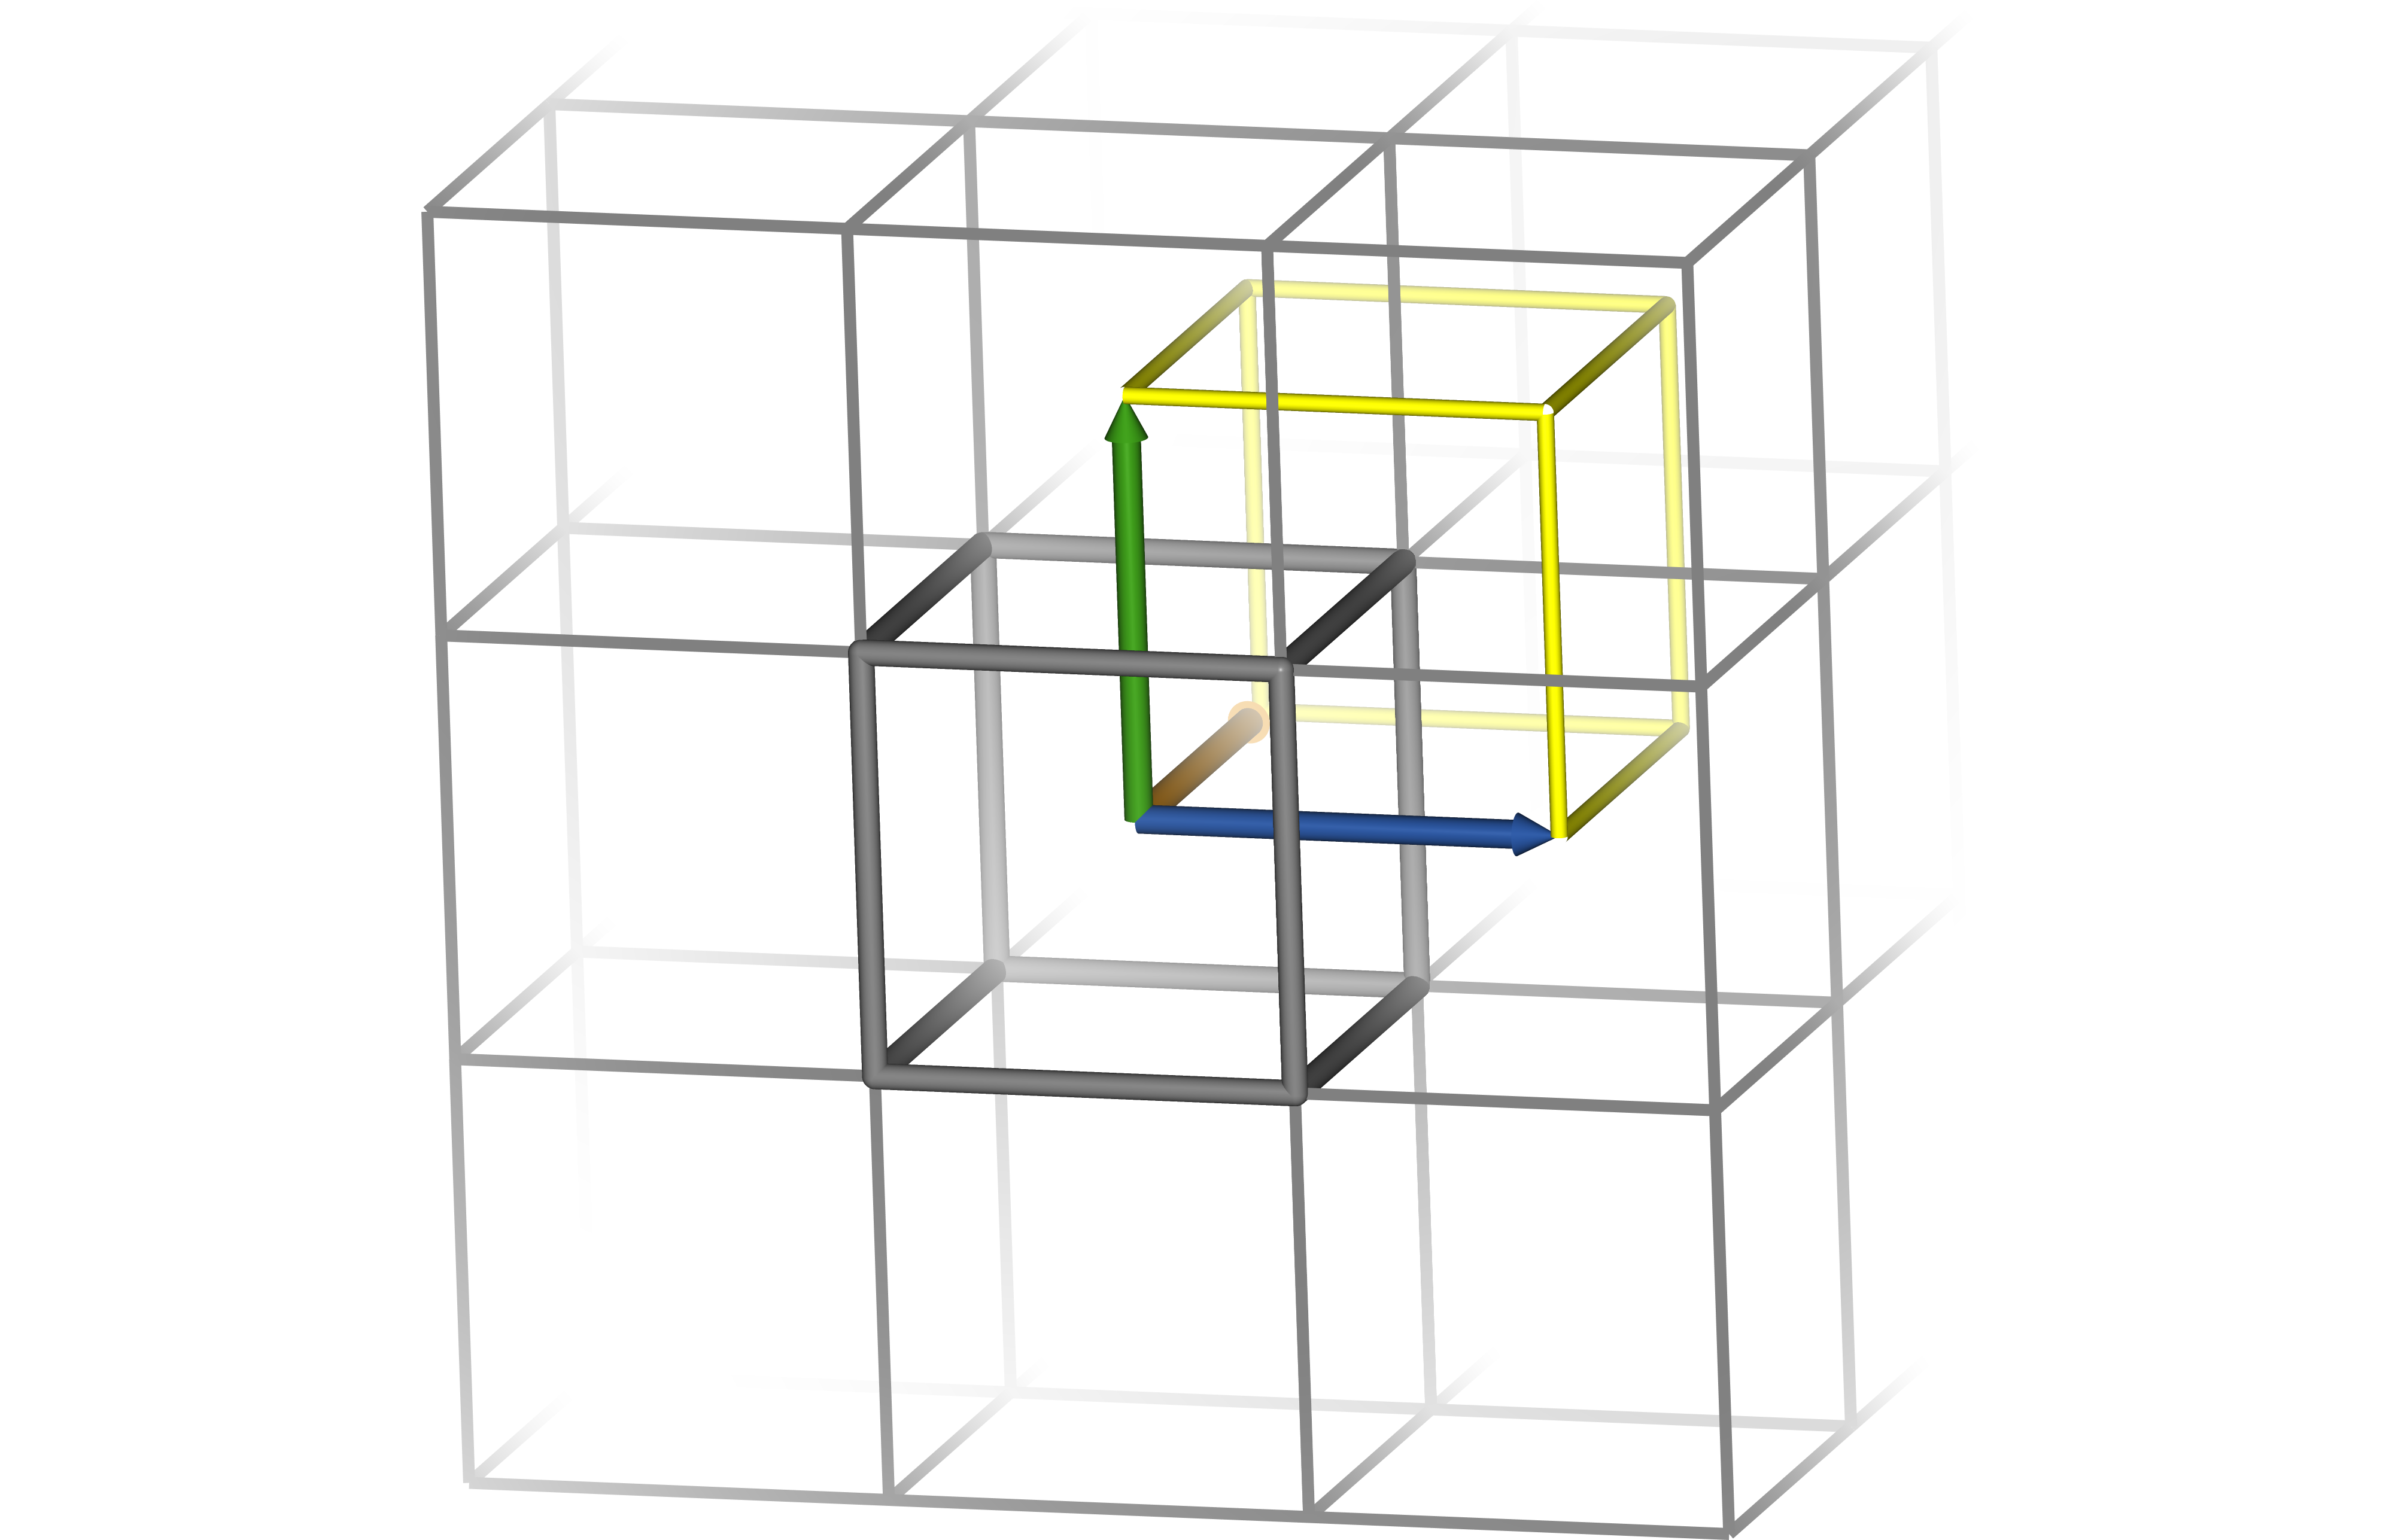 Periodic boundary conditions with a cubic box